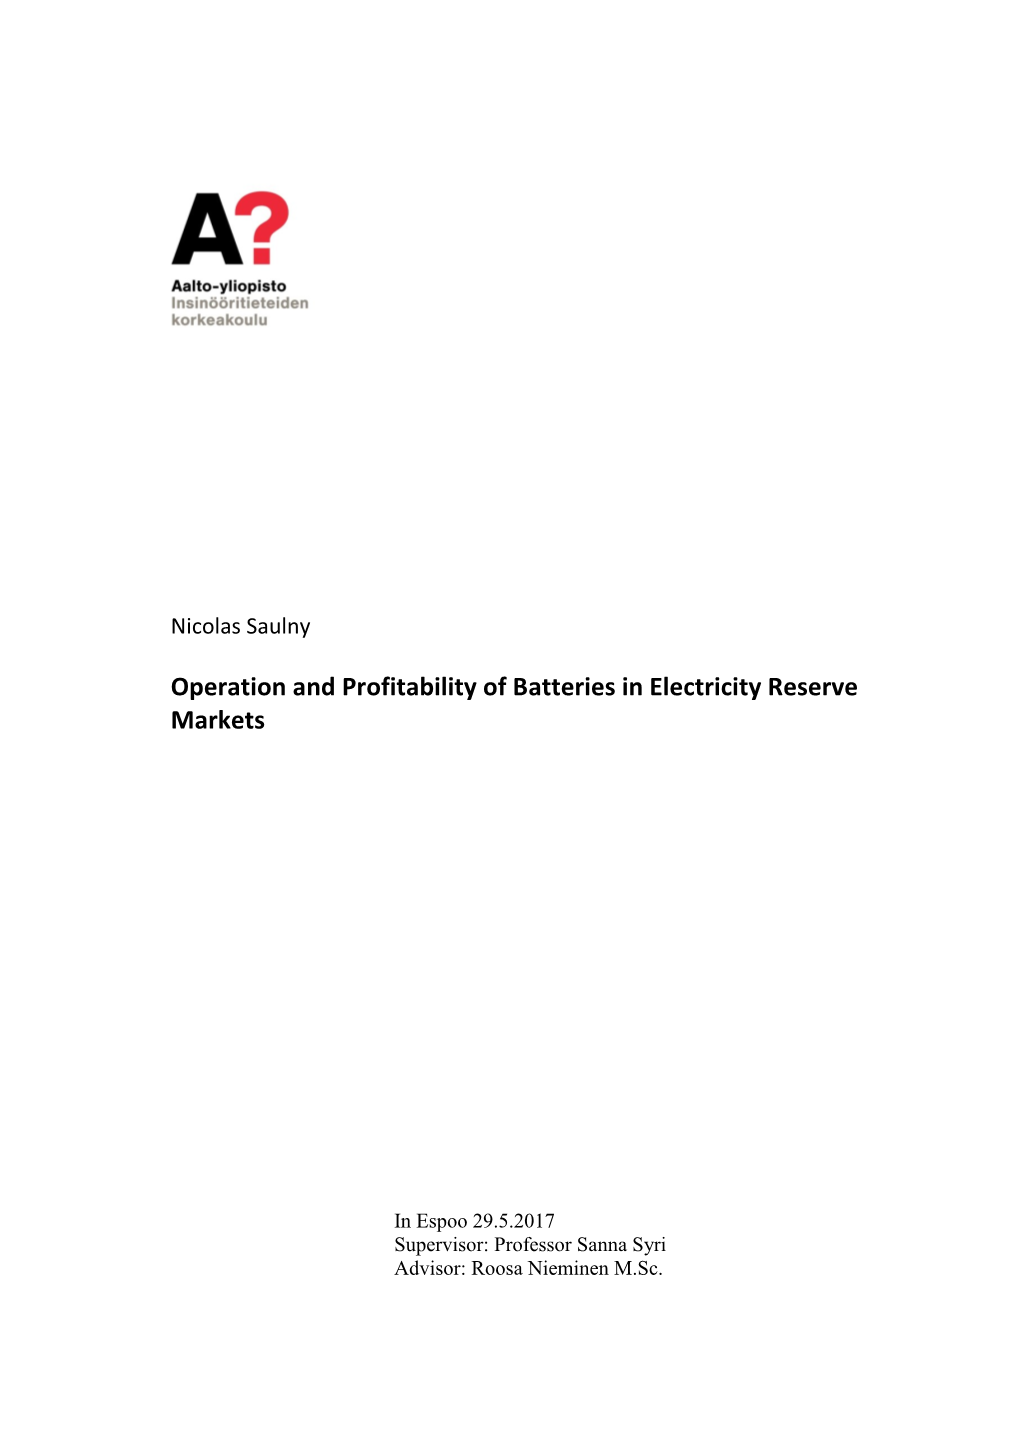 Operation and Profitability of Batteries in Electricity Reserve Markets